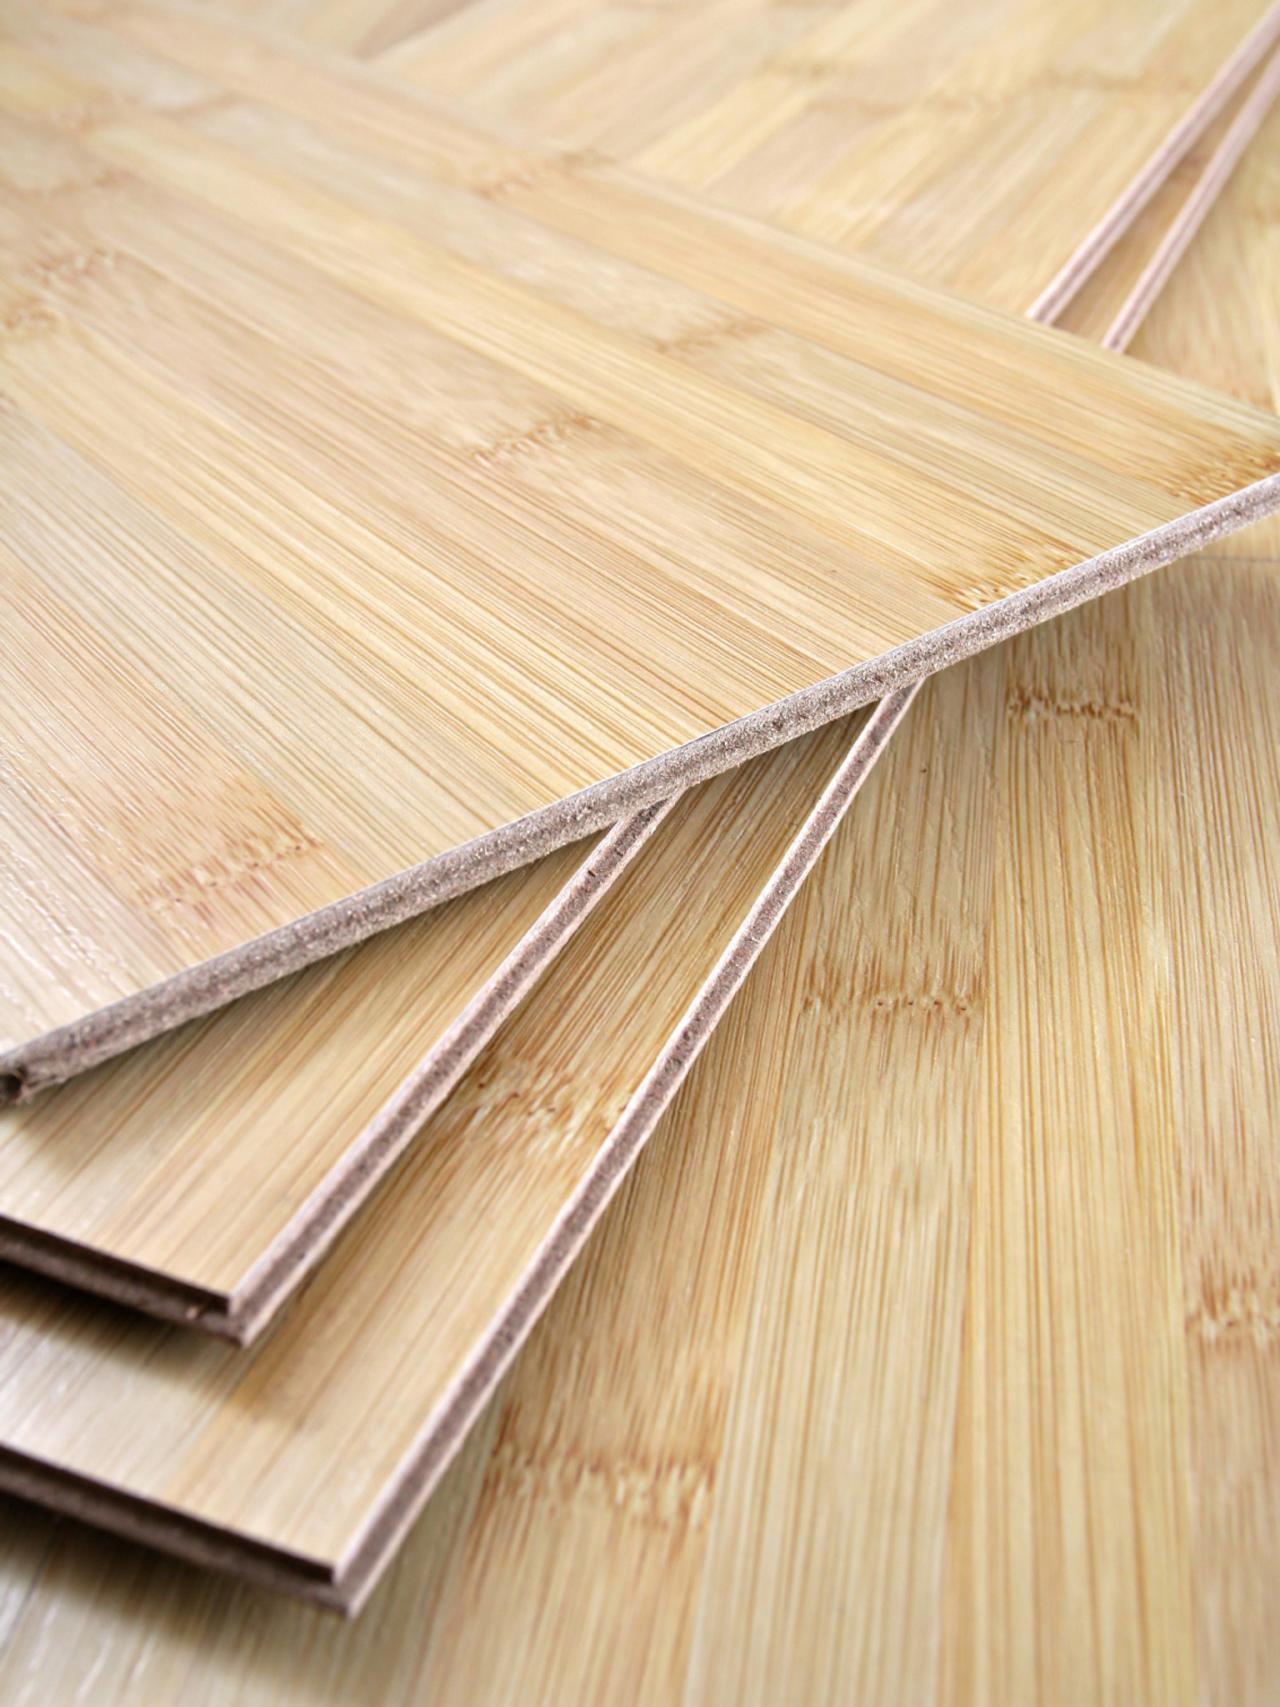 Cost Of Bamboo Floor Vs Engineered Hardwood, What Are The Pros And Cons Of Bamboo Flooring